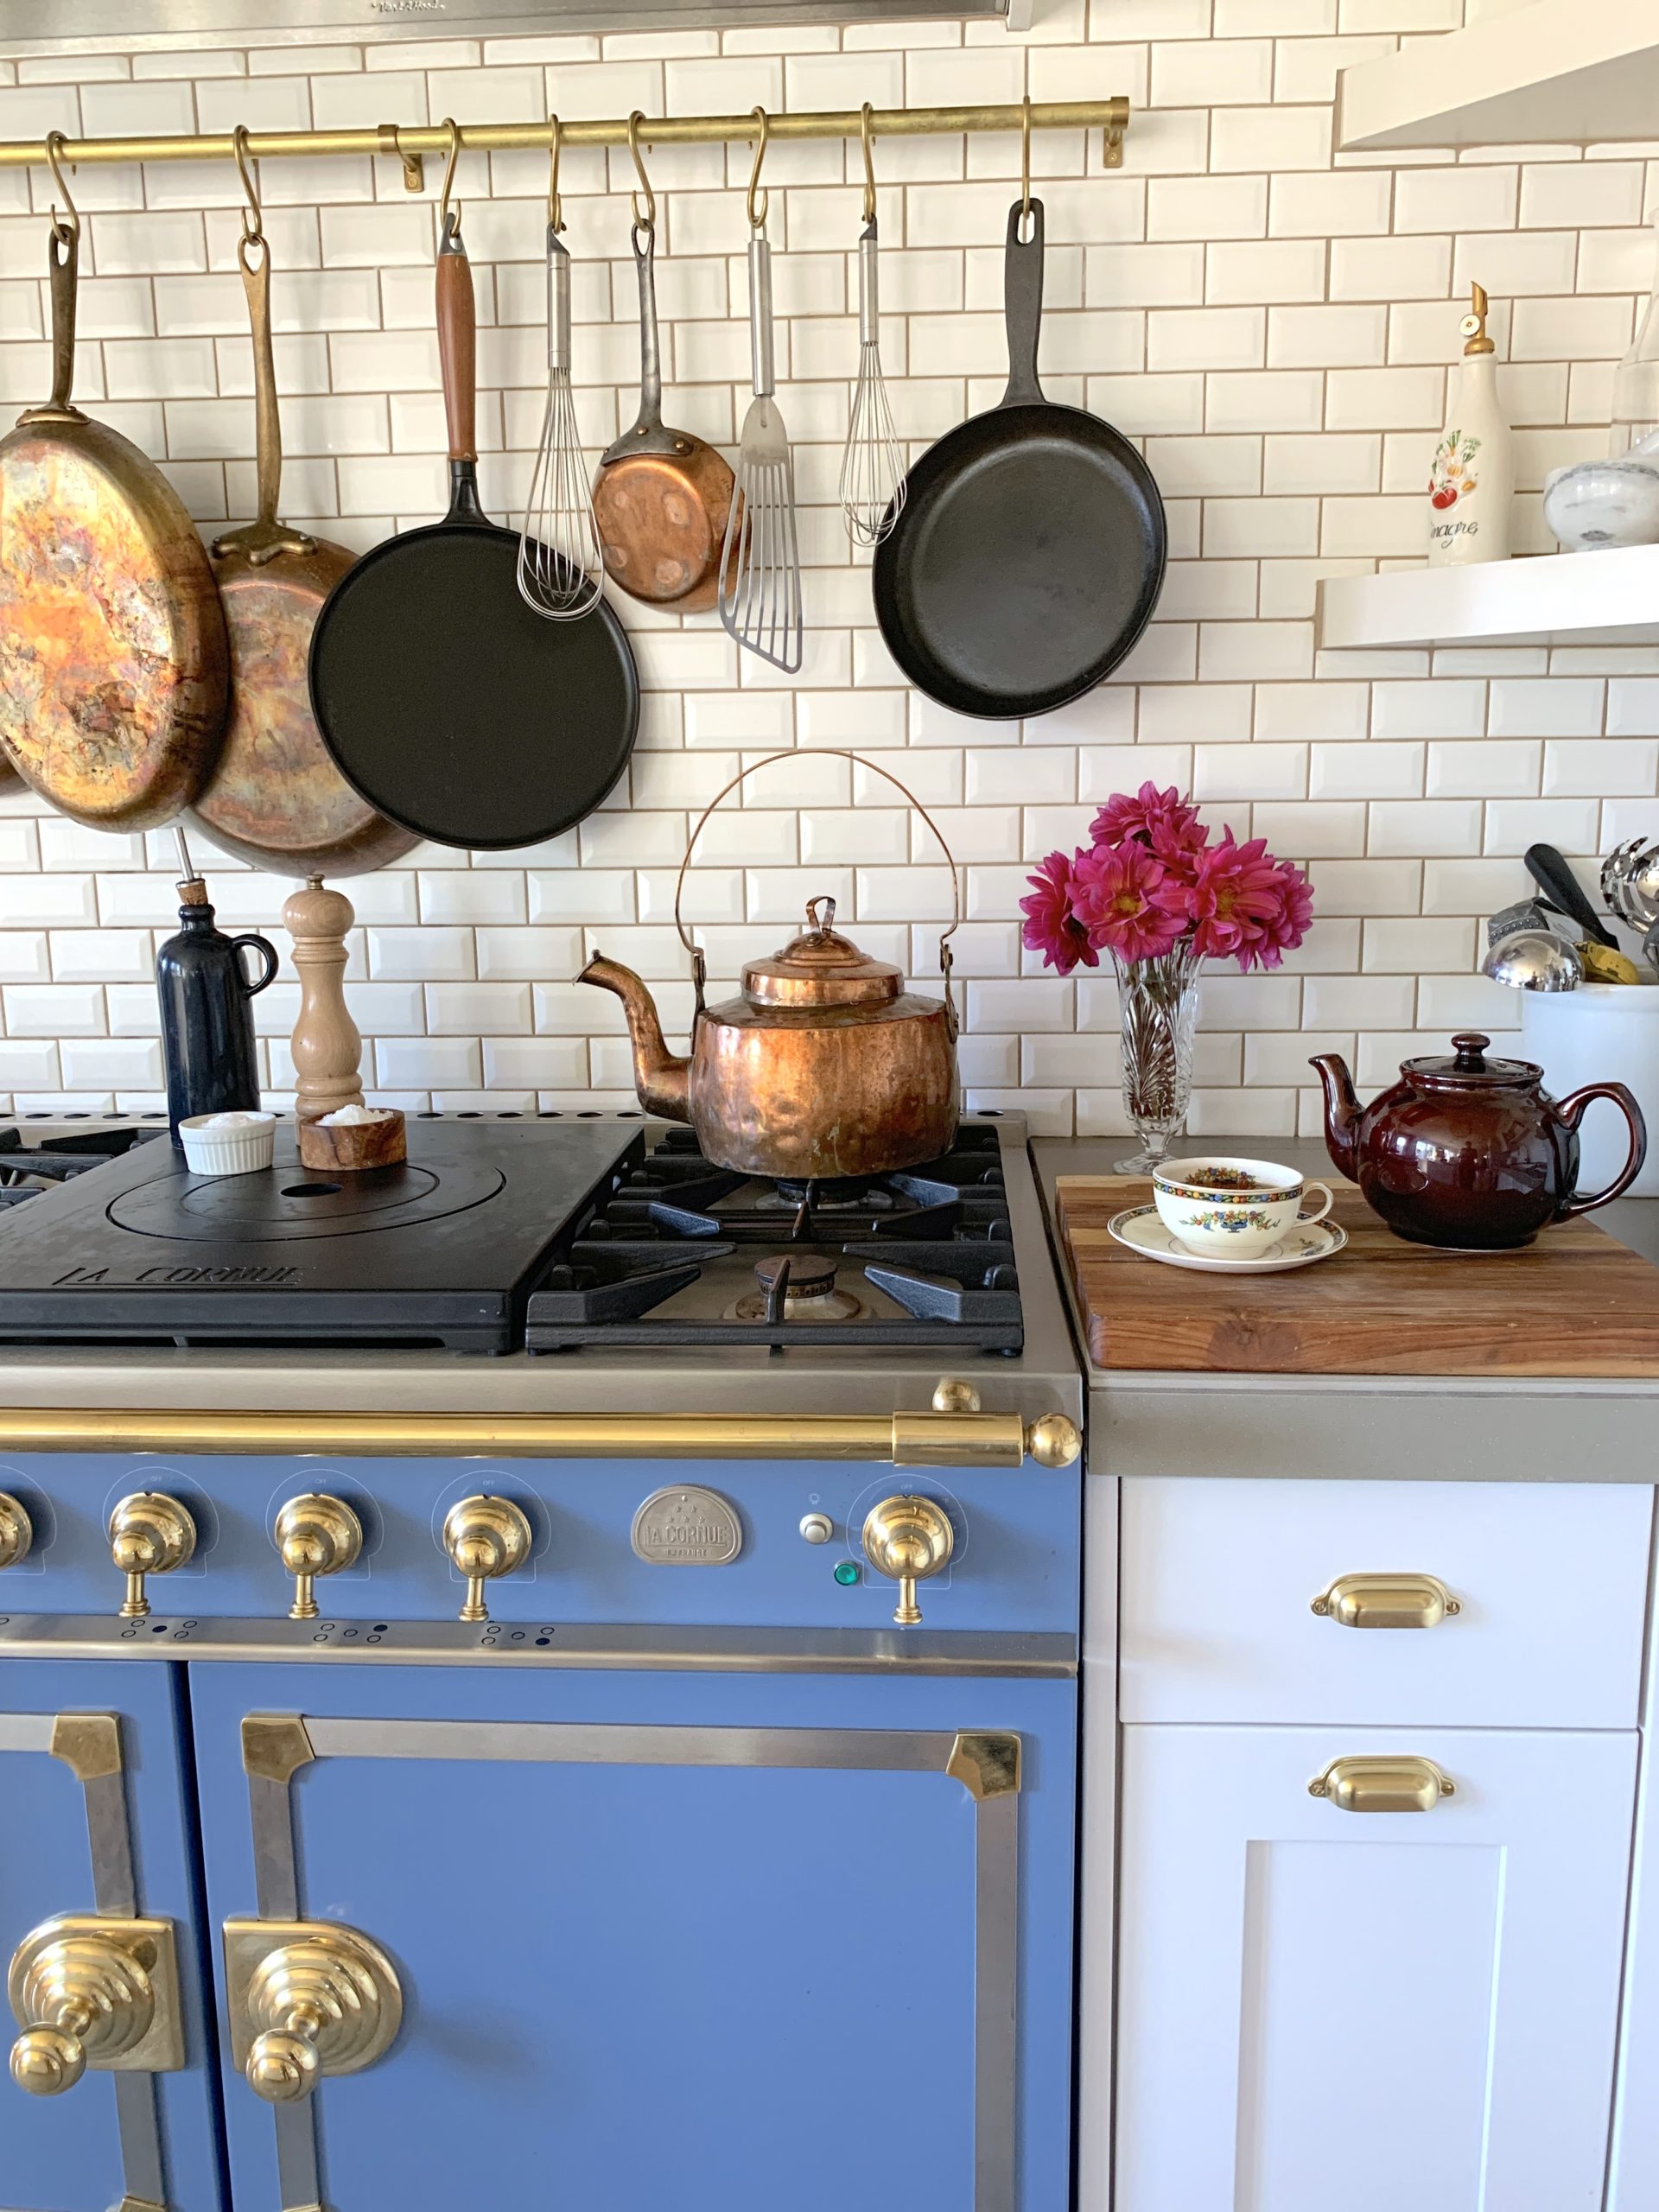 The Kitchen Reveal: Before & After & How I Customized My Small Space